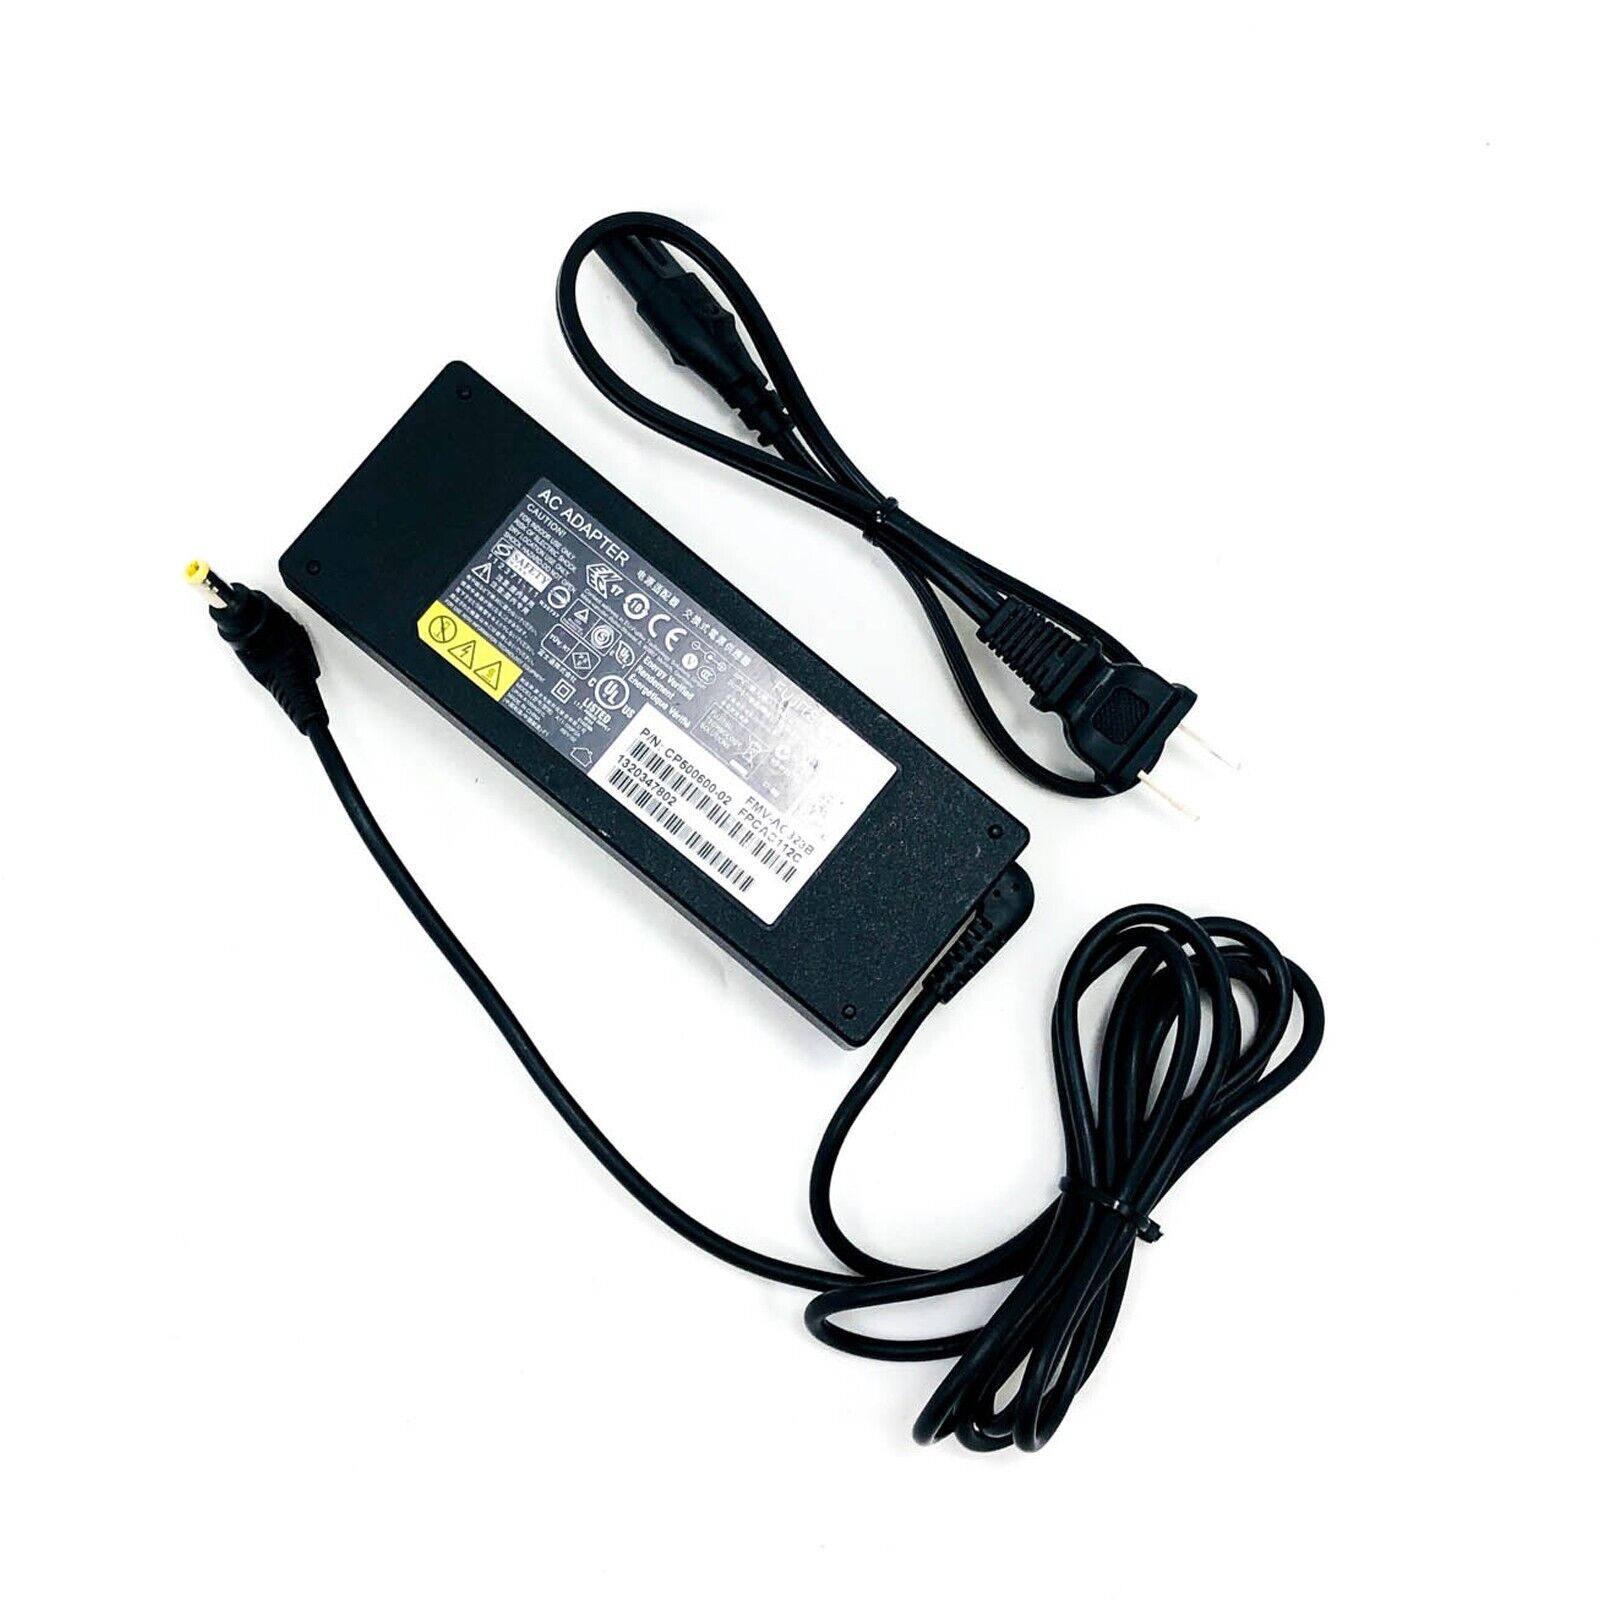 Genuine Fujitsu Power Supply for ASUS W-Series Laptop Charger /Power Cord